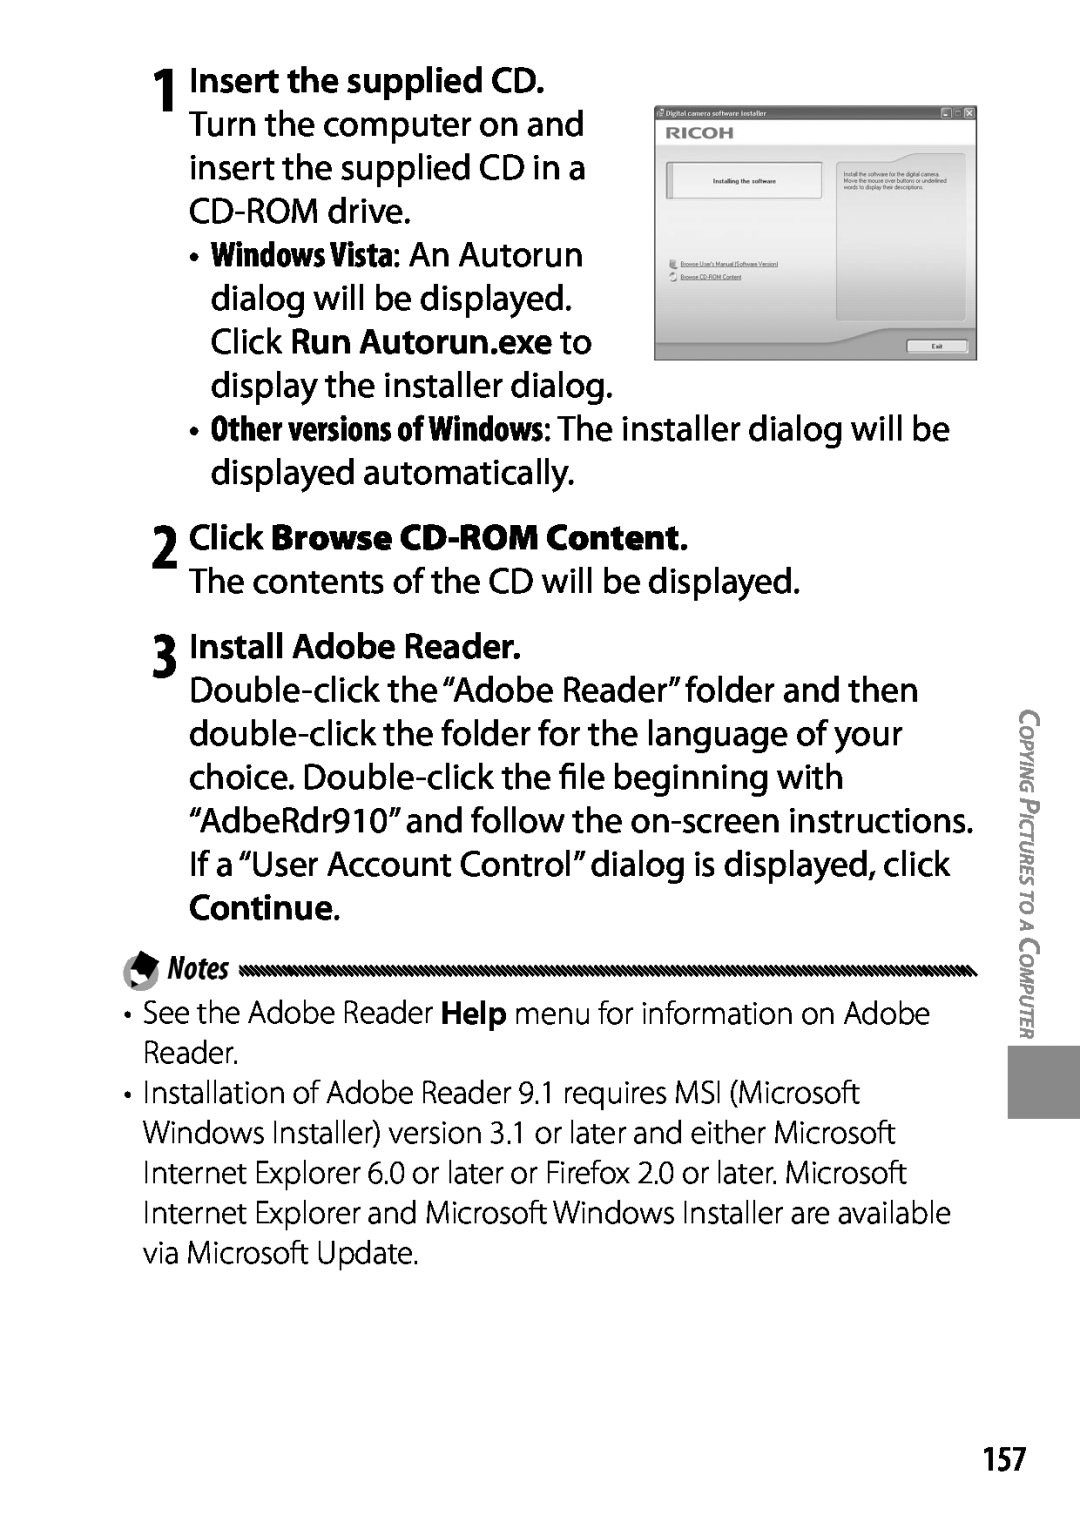 Ricoh 170543, GXR, 170553 Click Browse CD-ROM Content, 3 Install Adobe Reader, The contents of the CD will be displayed 